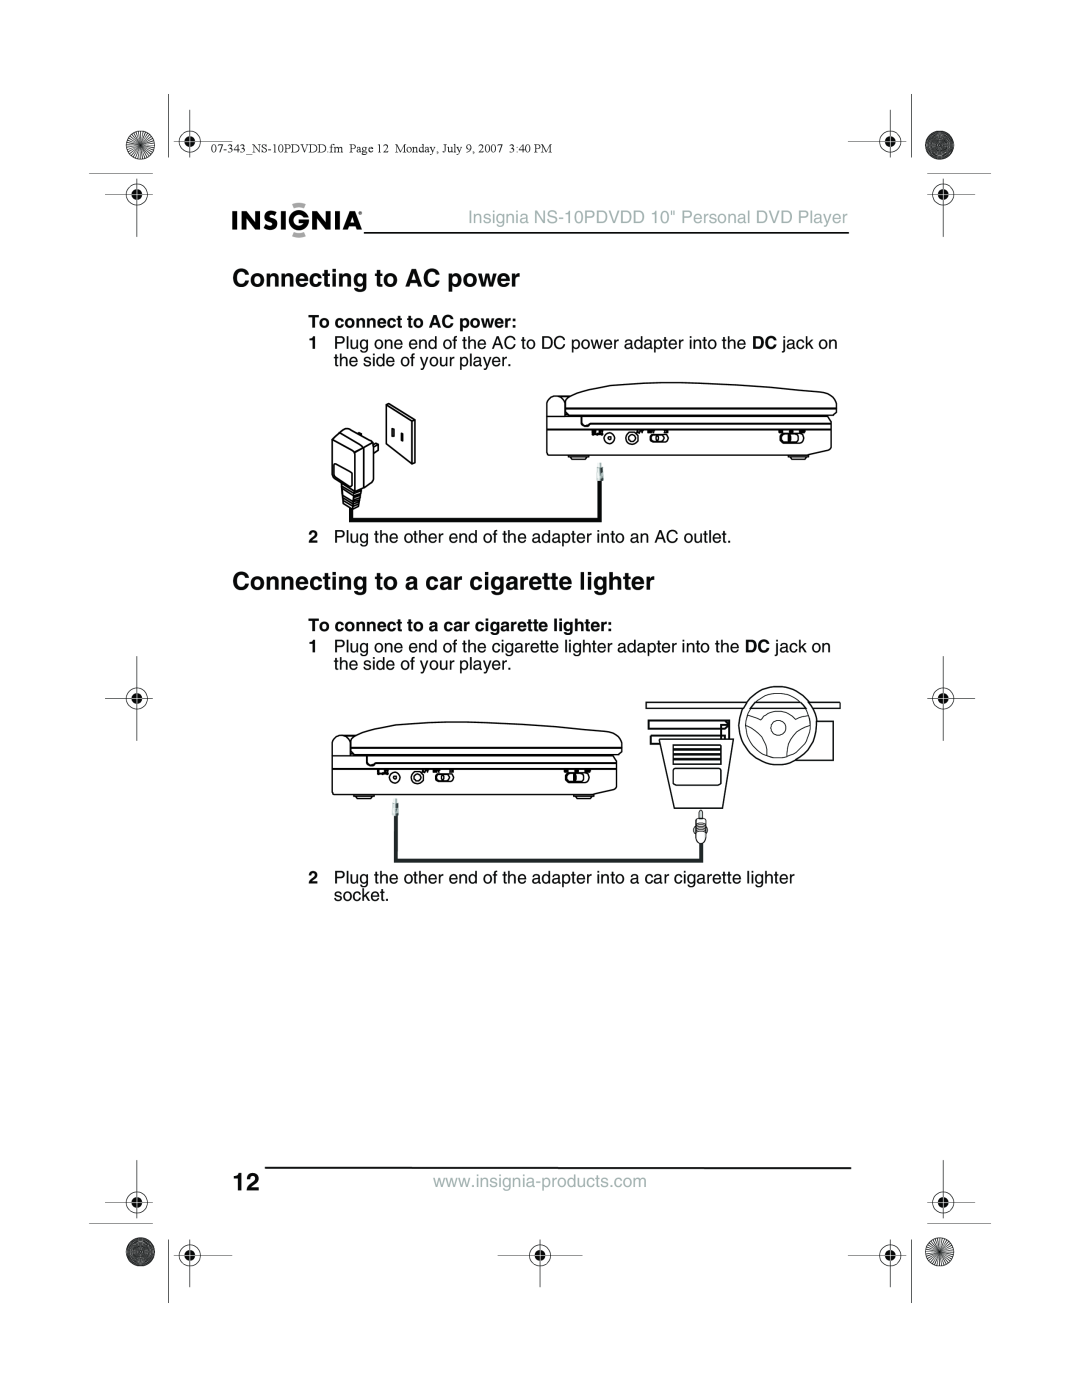 Insignia NS-10PDVDD manual Connecting to AC power, Connecting to a car cigarette lighter, To connect to AC power 